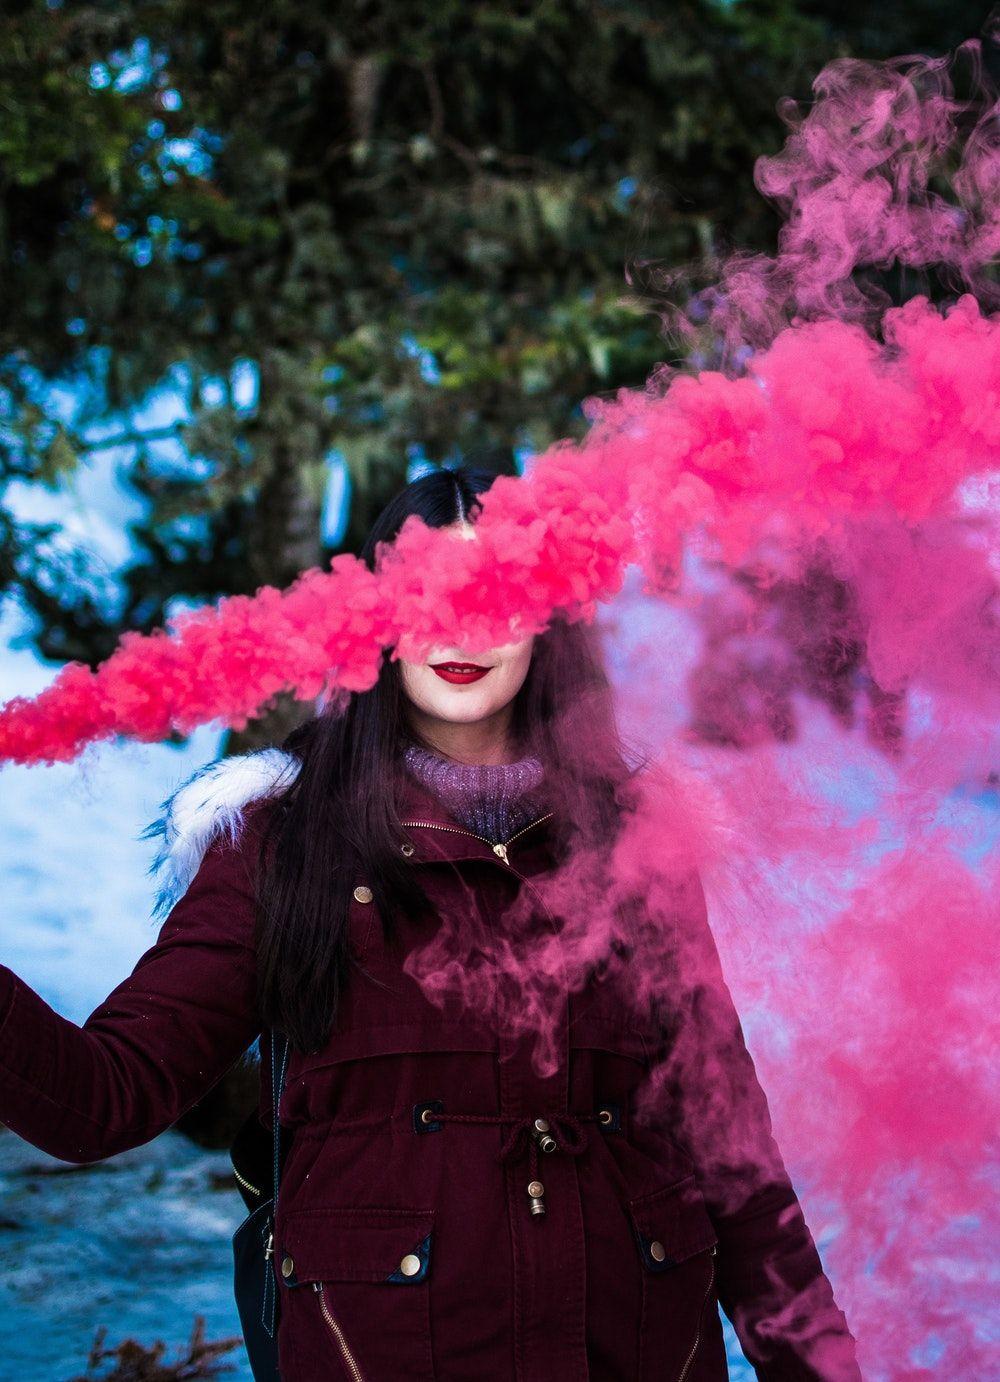 Smokebomb Picture. Download Free Image